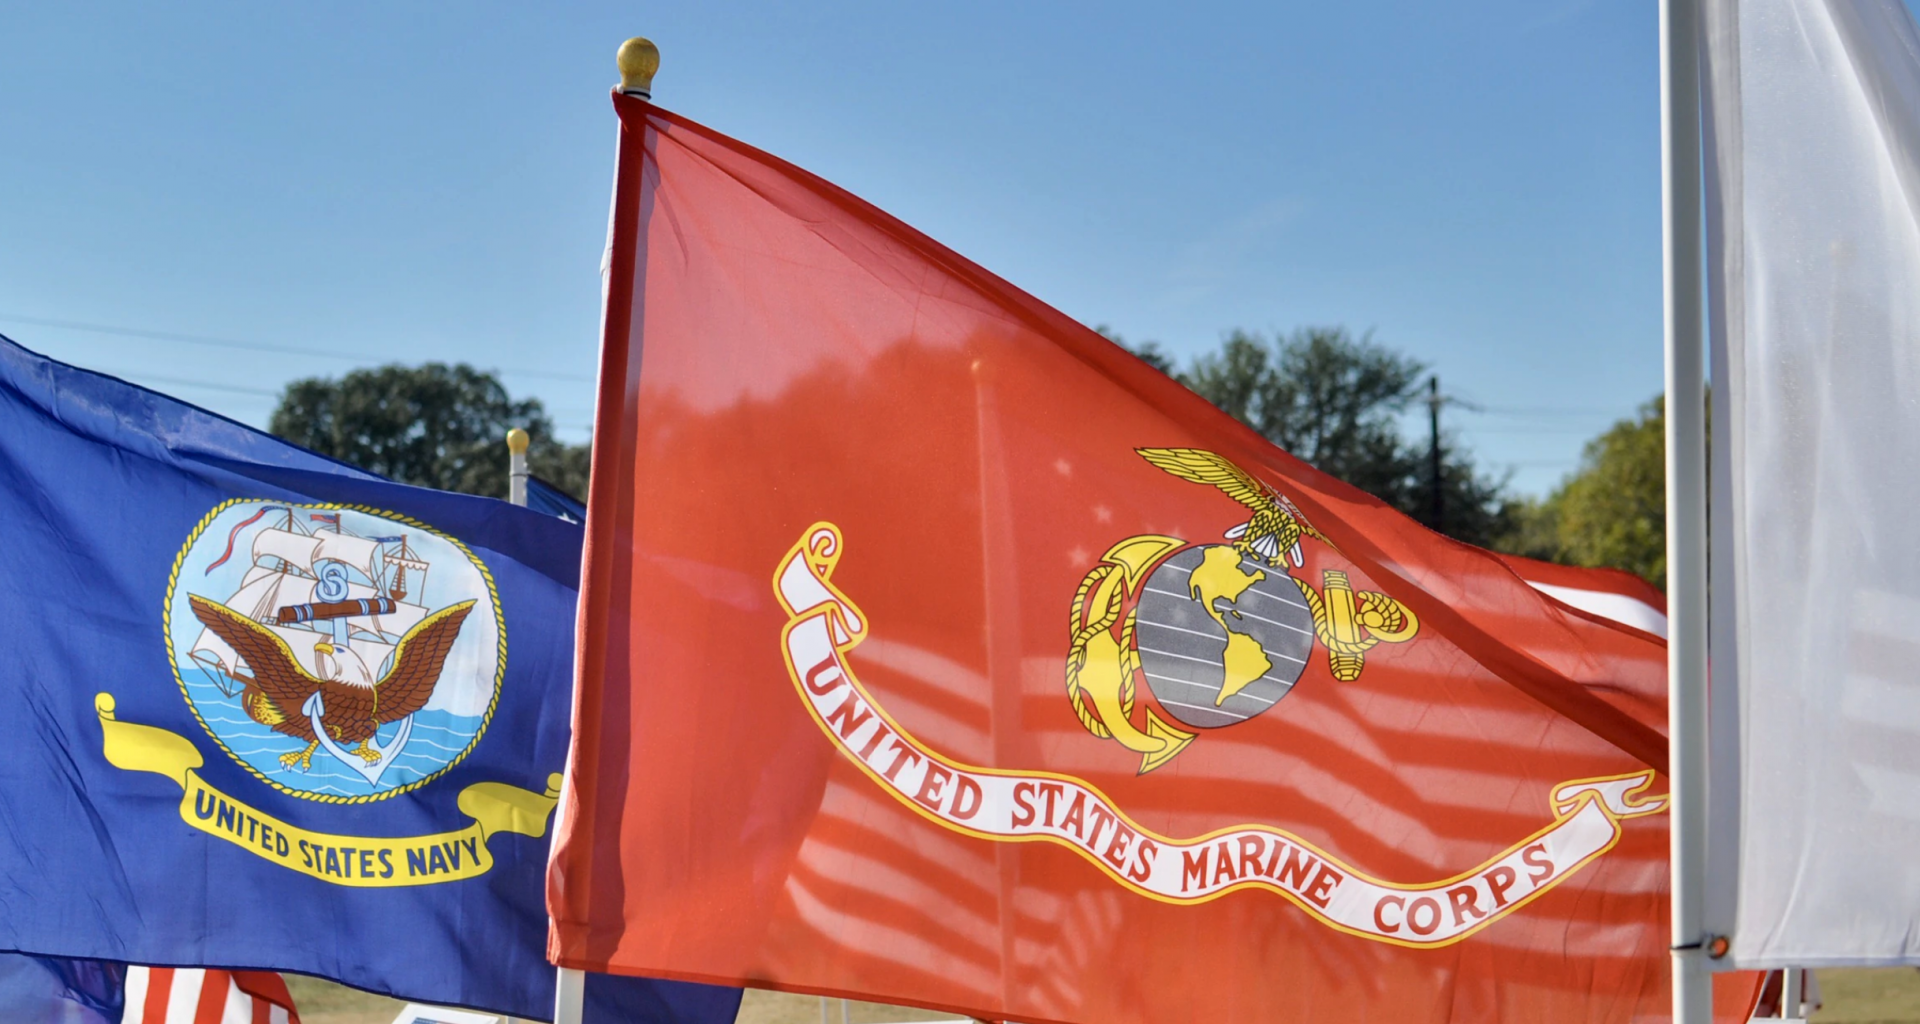 United States Navy and United States Marine Corps flags